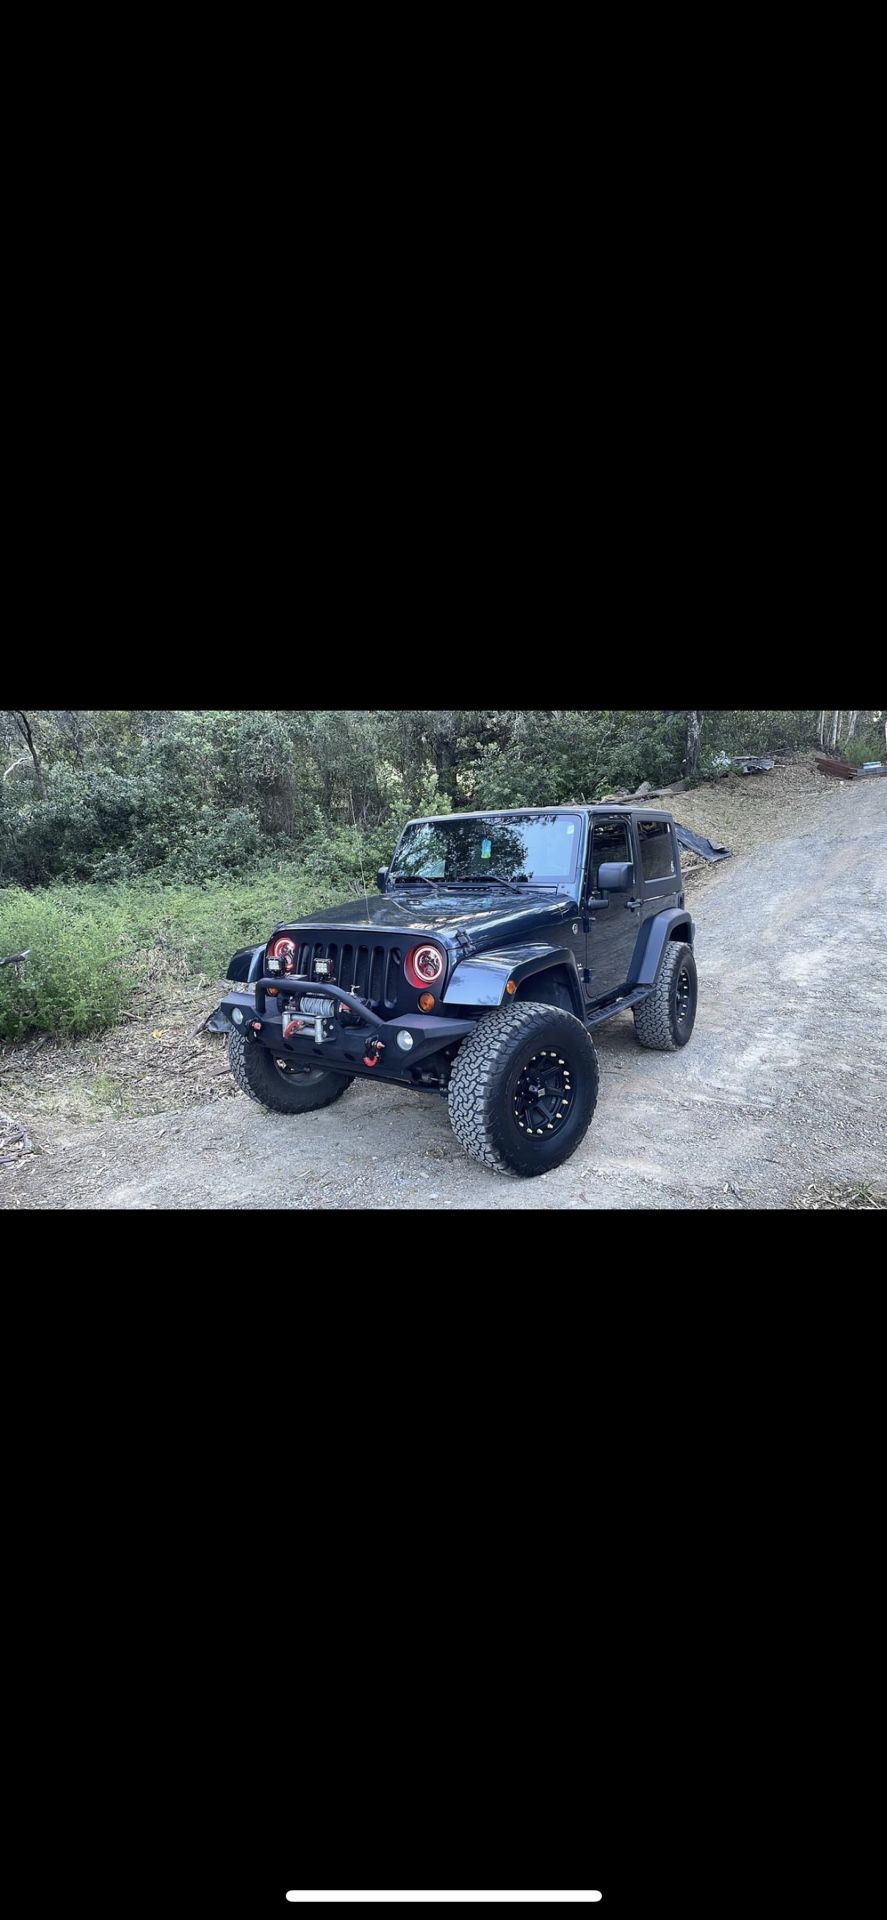 2007 Jeep Wrangler for Sale in Windsor, CA - OfferUp